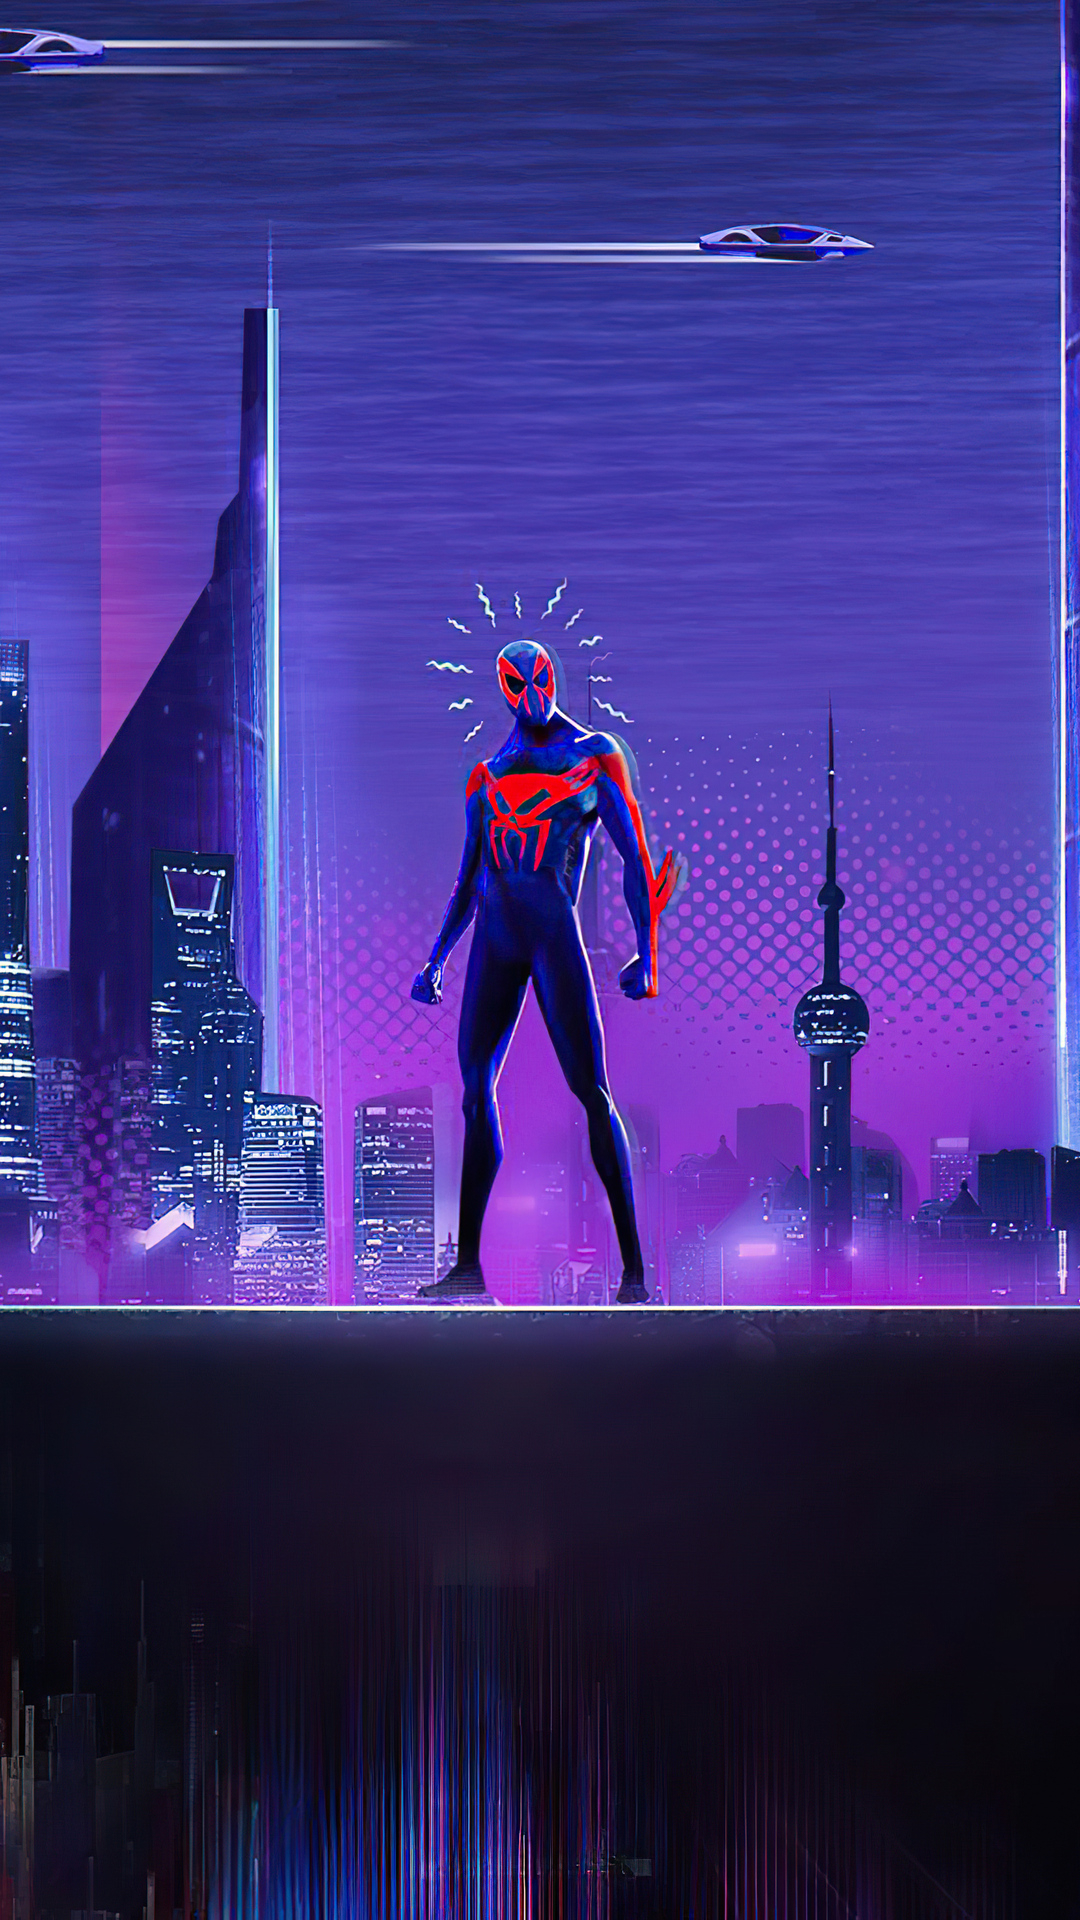 1080x1920 Spider Man 2099 Spider Verse Iphone 7,6s,6 Plus, Pixel xl ,One Plus 3,3t,5 HD 4k Wallpapers, Images, Backgrounds, Photos and Pictures